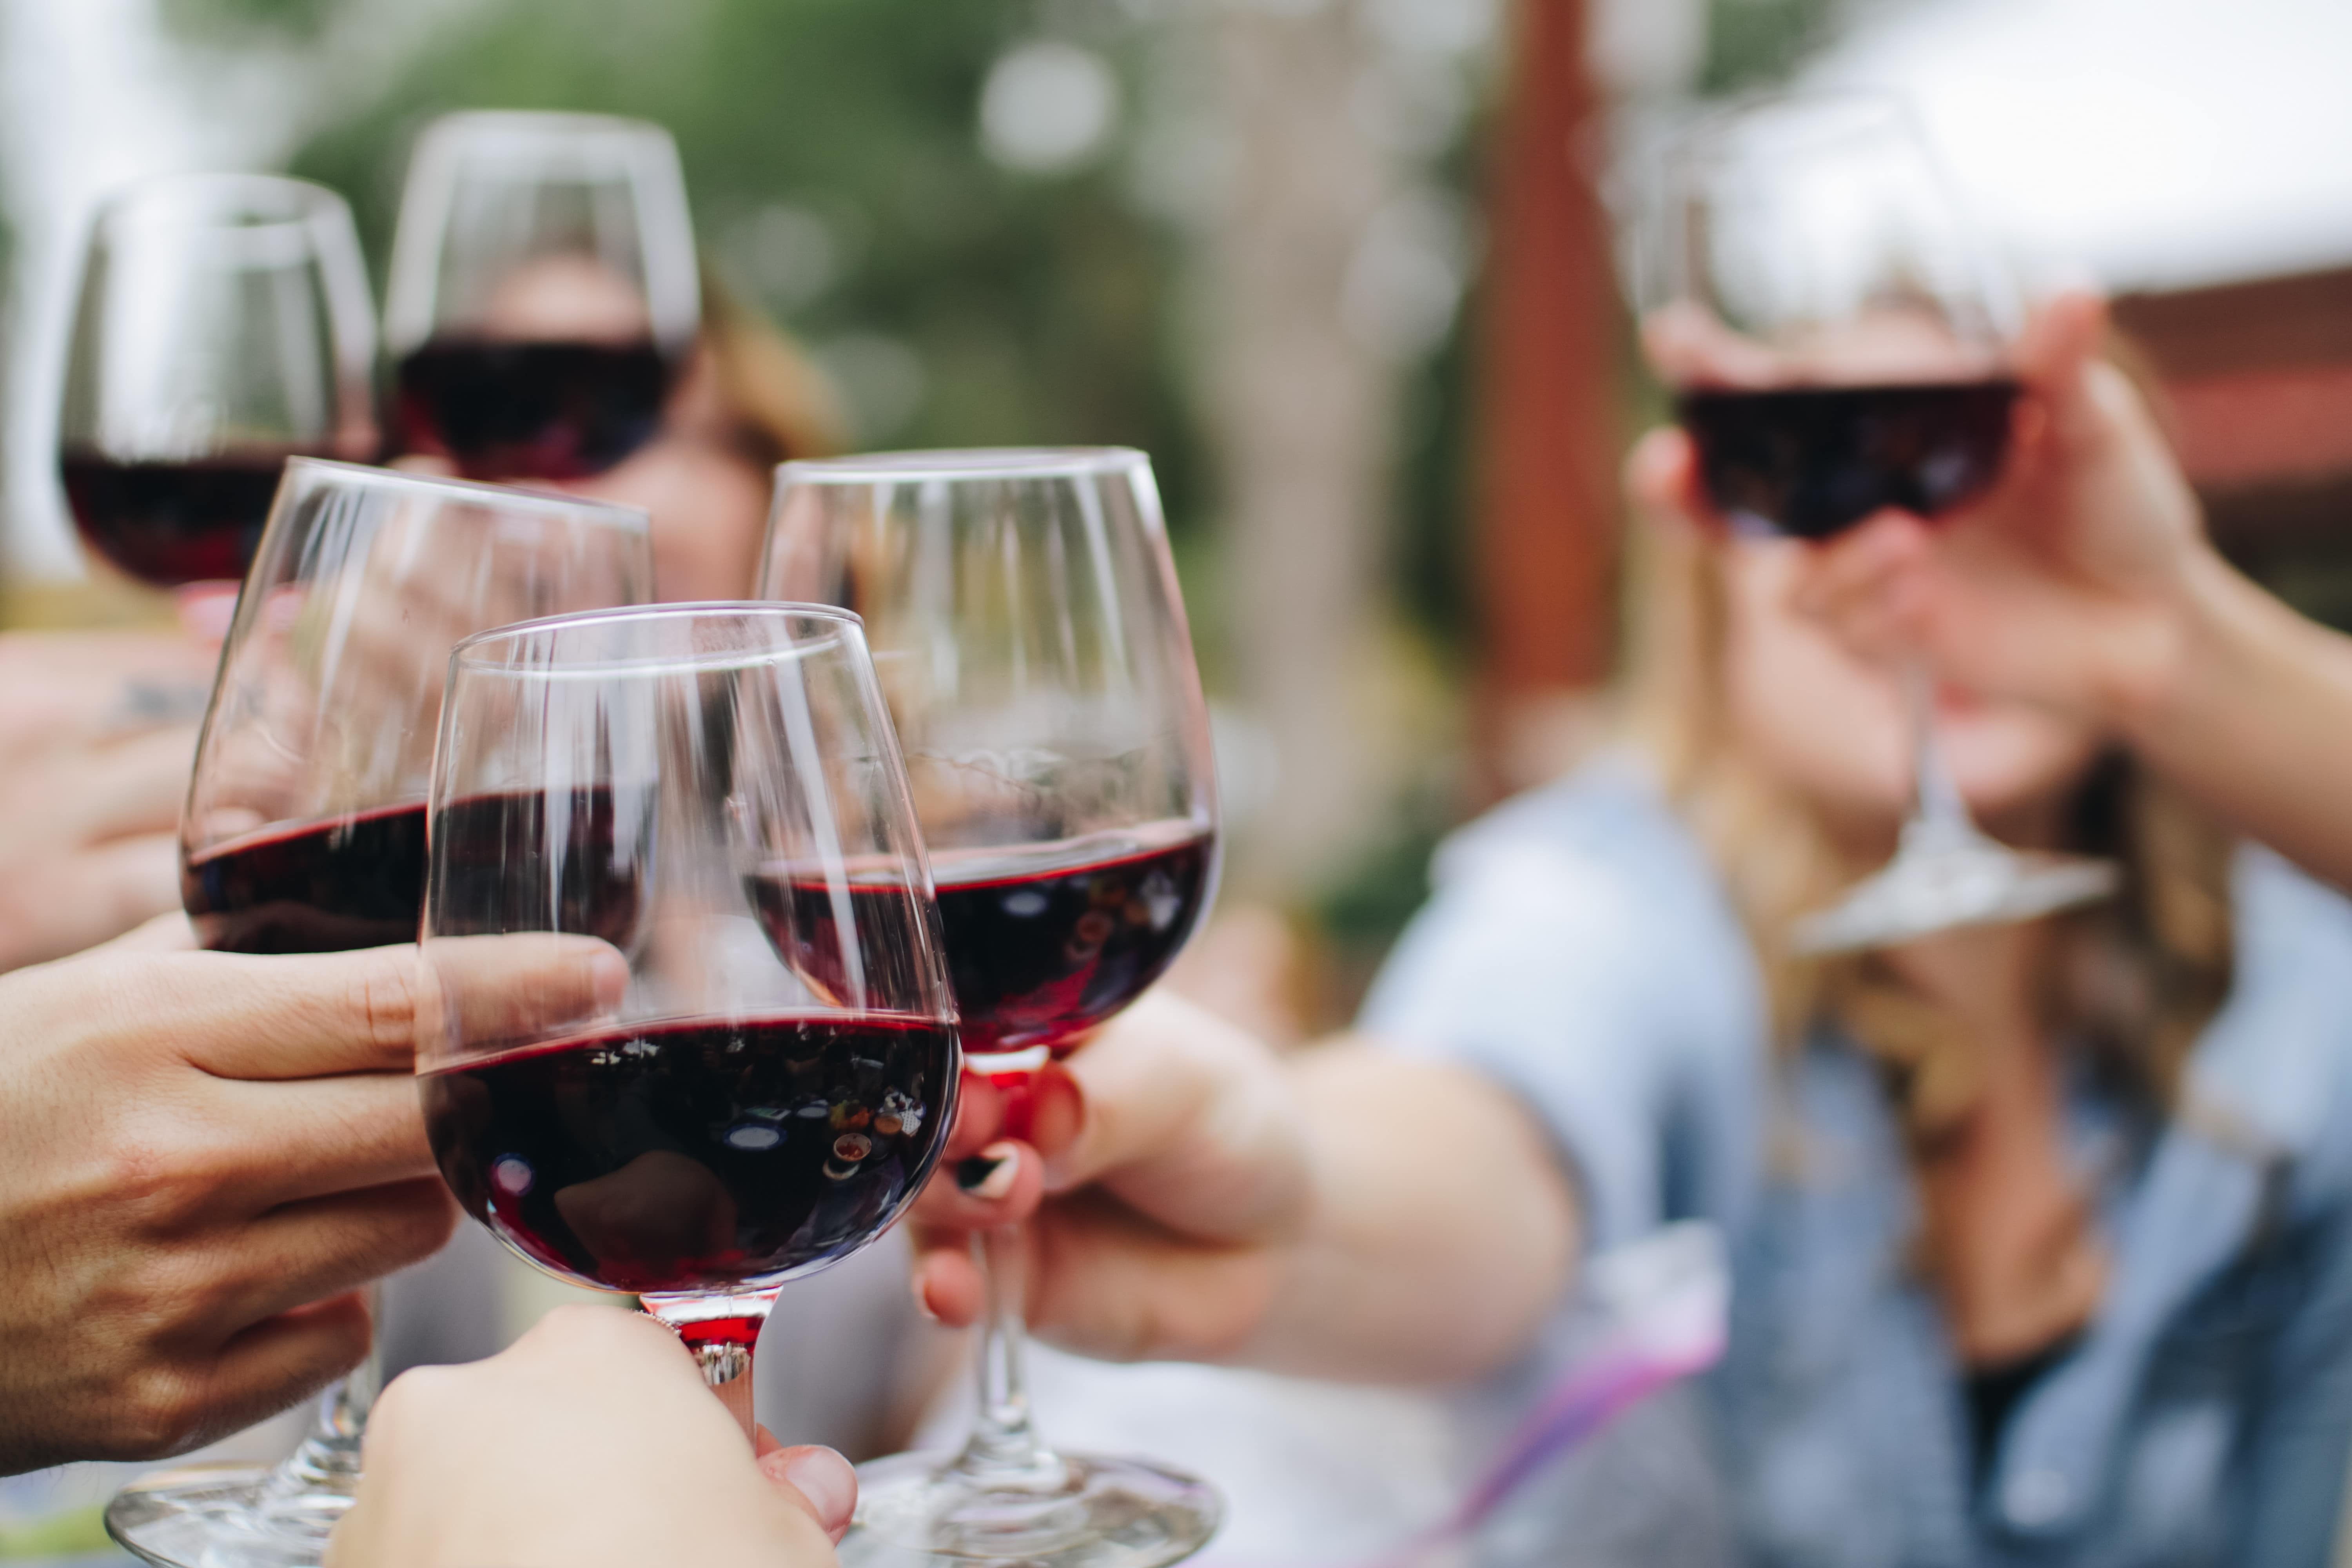 Stock image -Friends toasting with glasses of red wine - Photo by Kelsey Knight